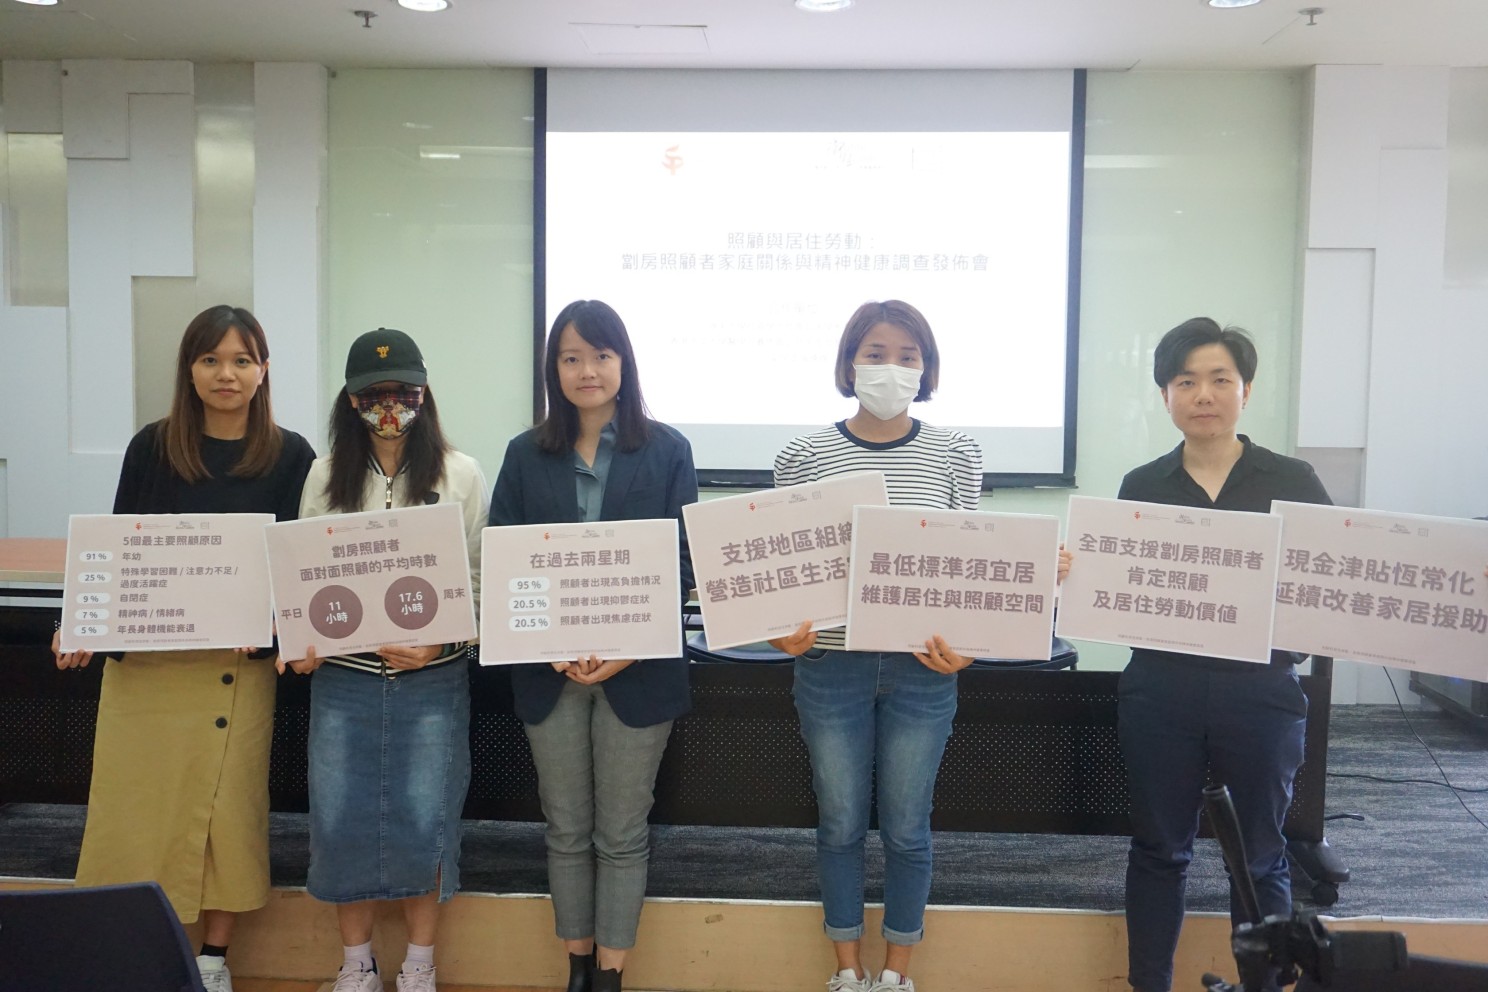 The research team with Prof Ruby Lai Yuen-shan (right), Assistant Professor of the Department of Sociology and Social Policy at Lingnan University, releases the study findings on 30 April.